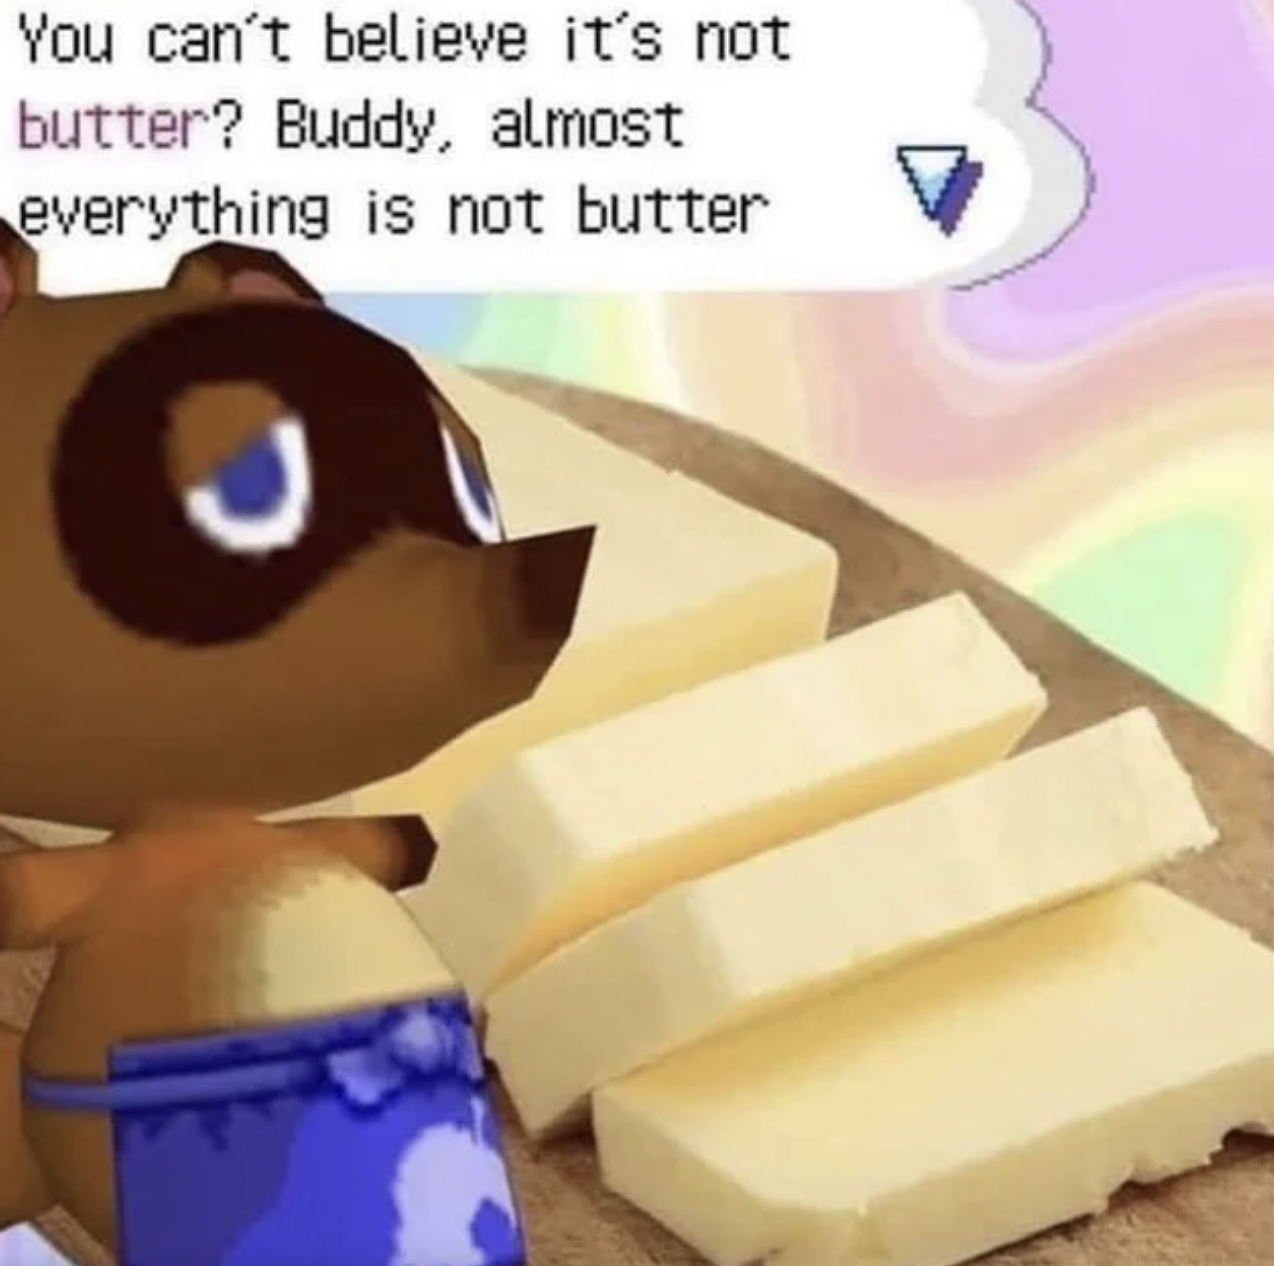 Memes That Technically Tell the Truth - butter png - You can't believe it's not butter? Buddy, almost everything is not butter